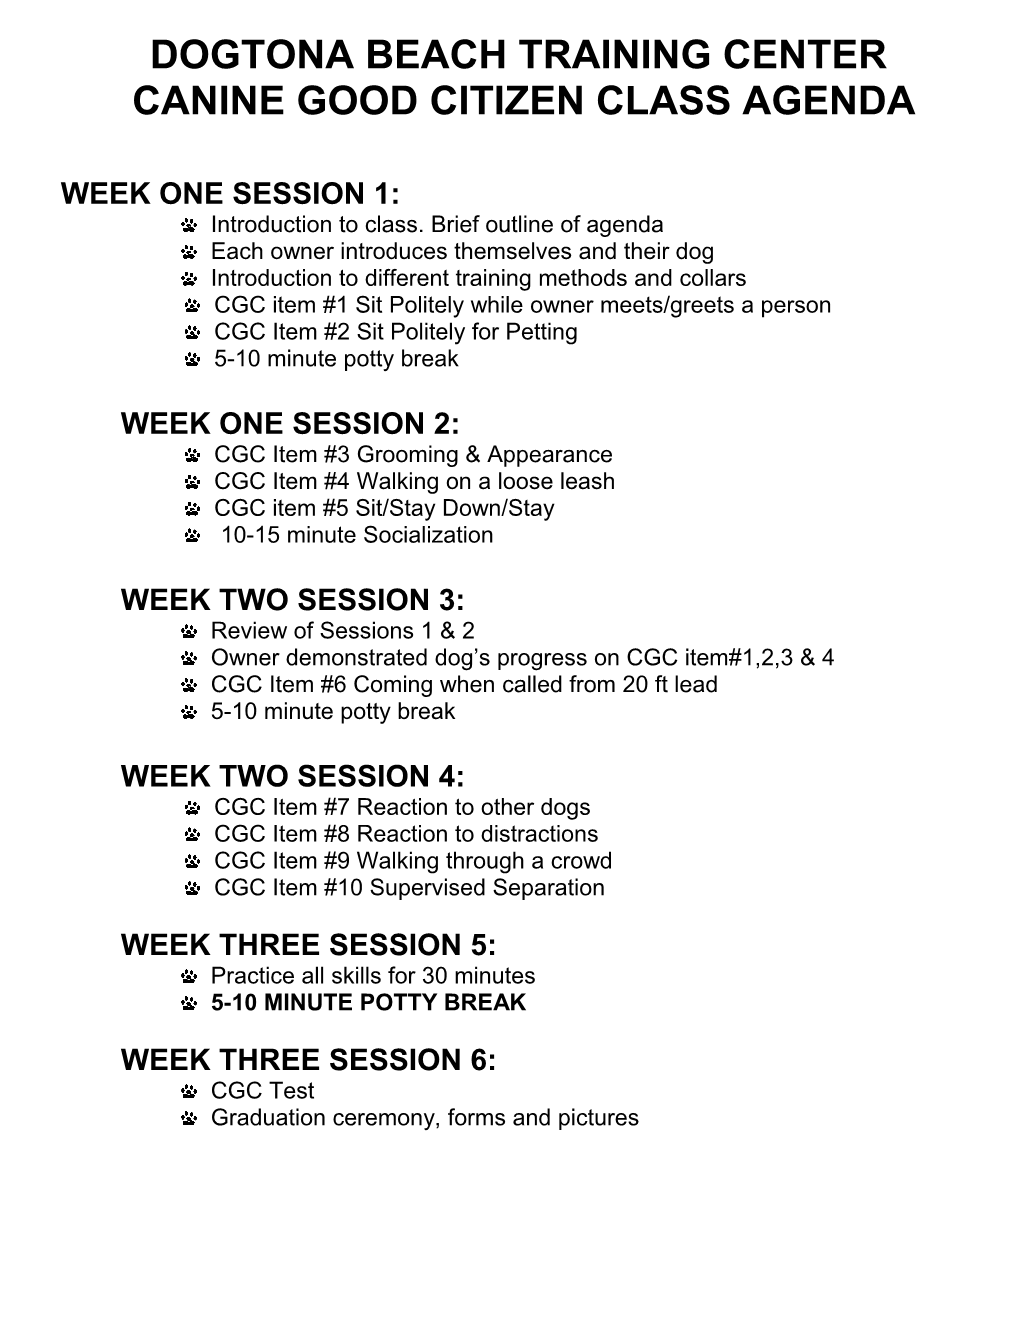 Week One Session 1